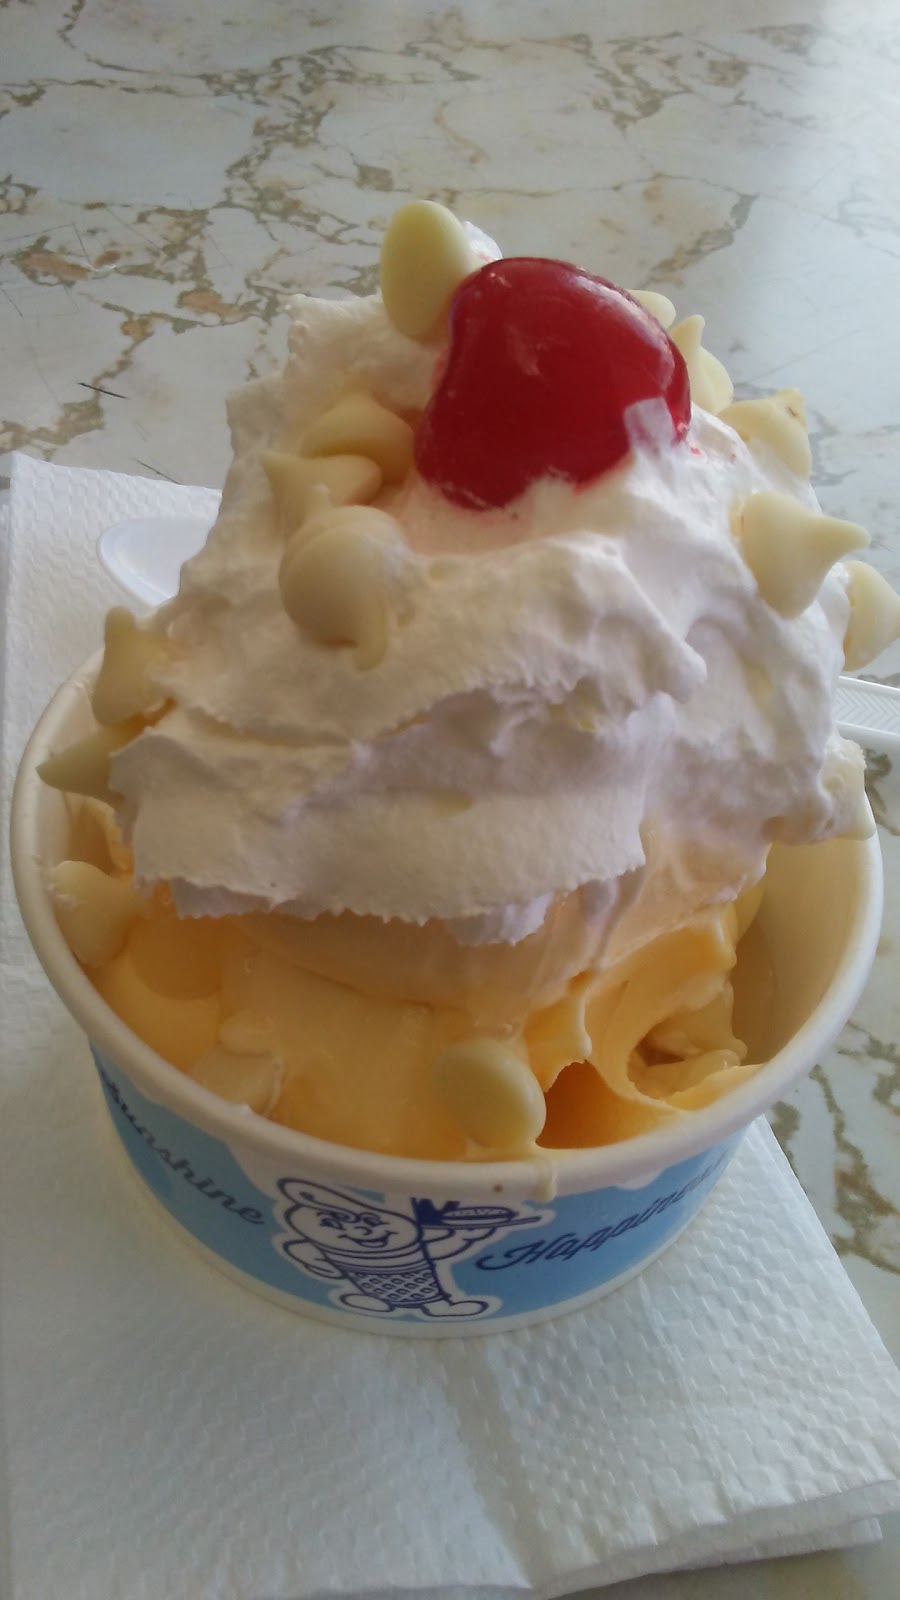 Fosters Freeze | 7540 Eastern Ave, Bell Gardens, CA 90201, USA | Phone: (562) 927-1648